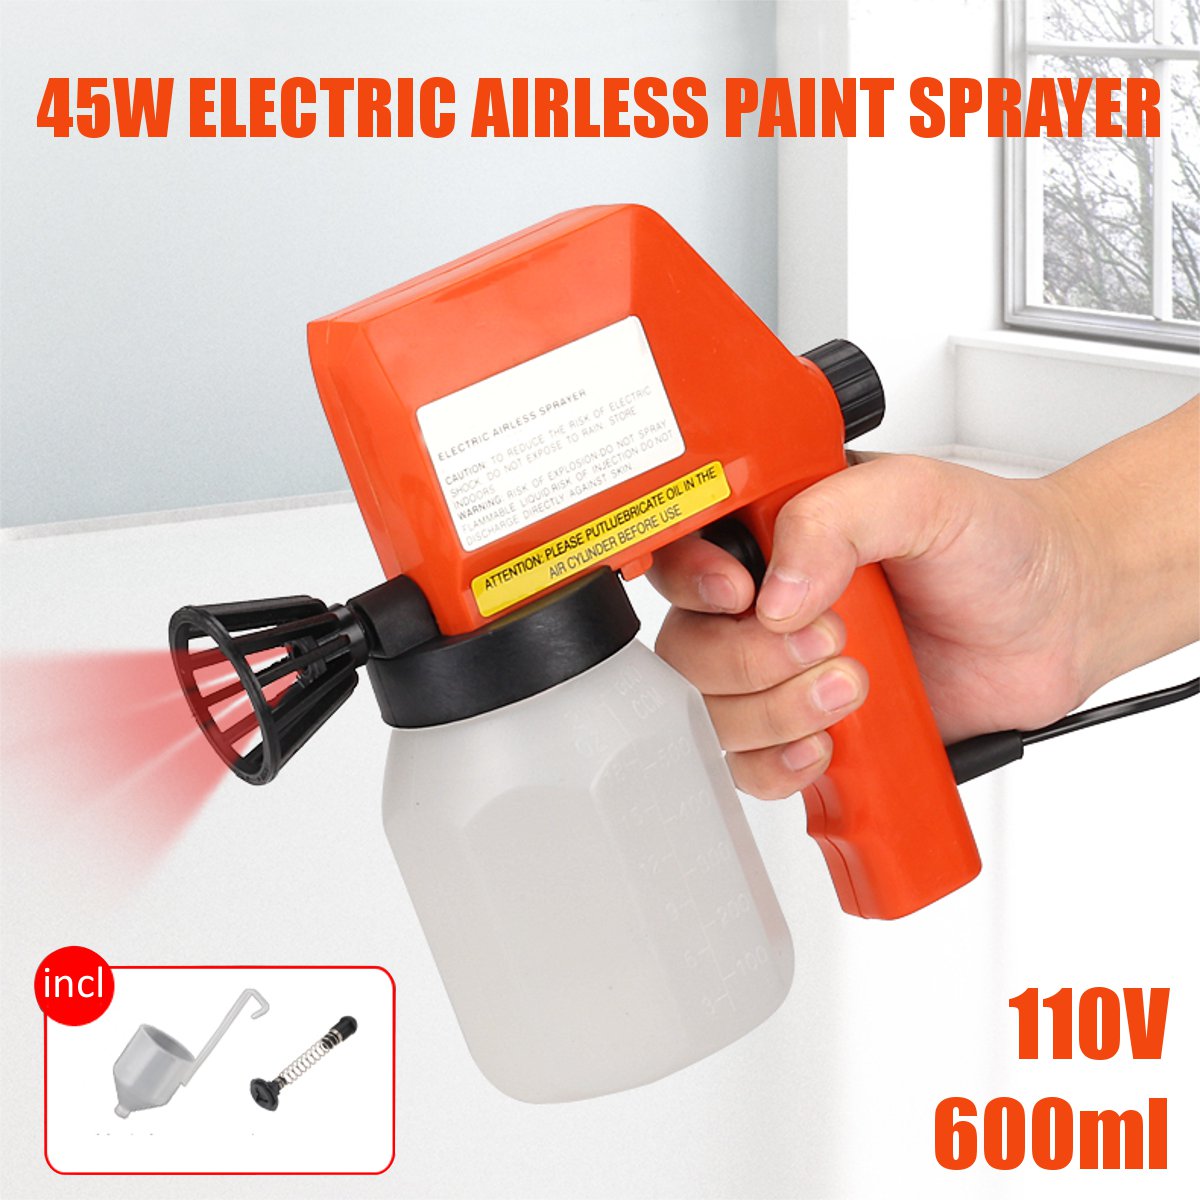 Electrical-Spray-PG-350-600ML-220V-08mm-Nozzle-Paint-Sprayer-Wall-Decorative-Painting-Blender-Paint--1587275-1